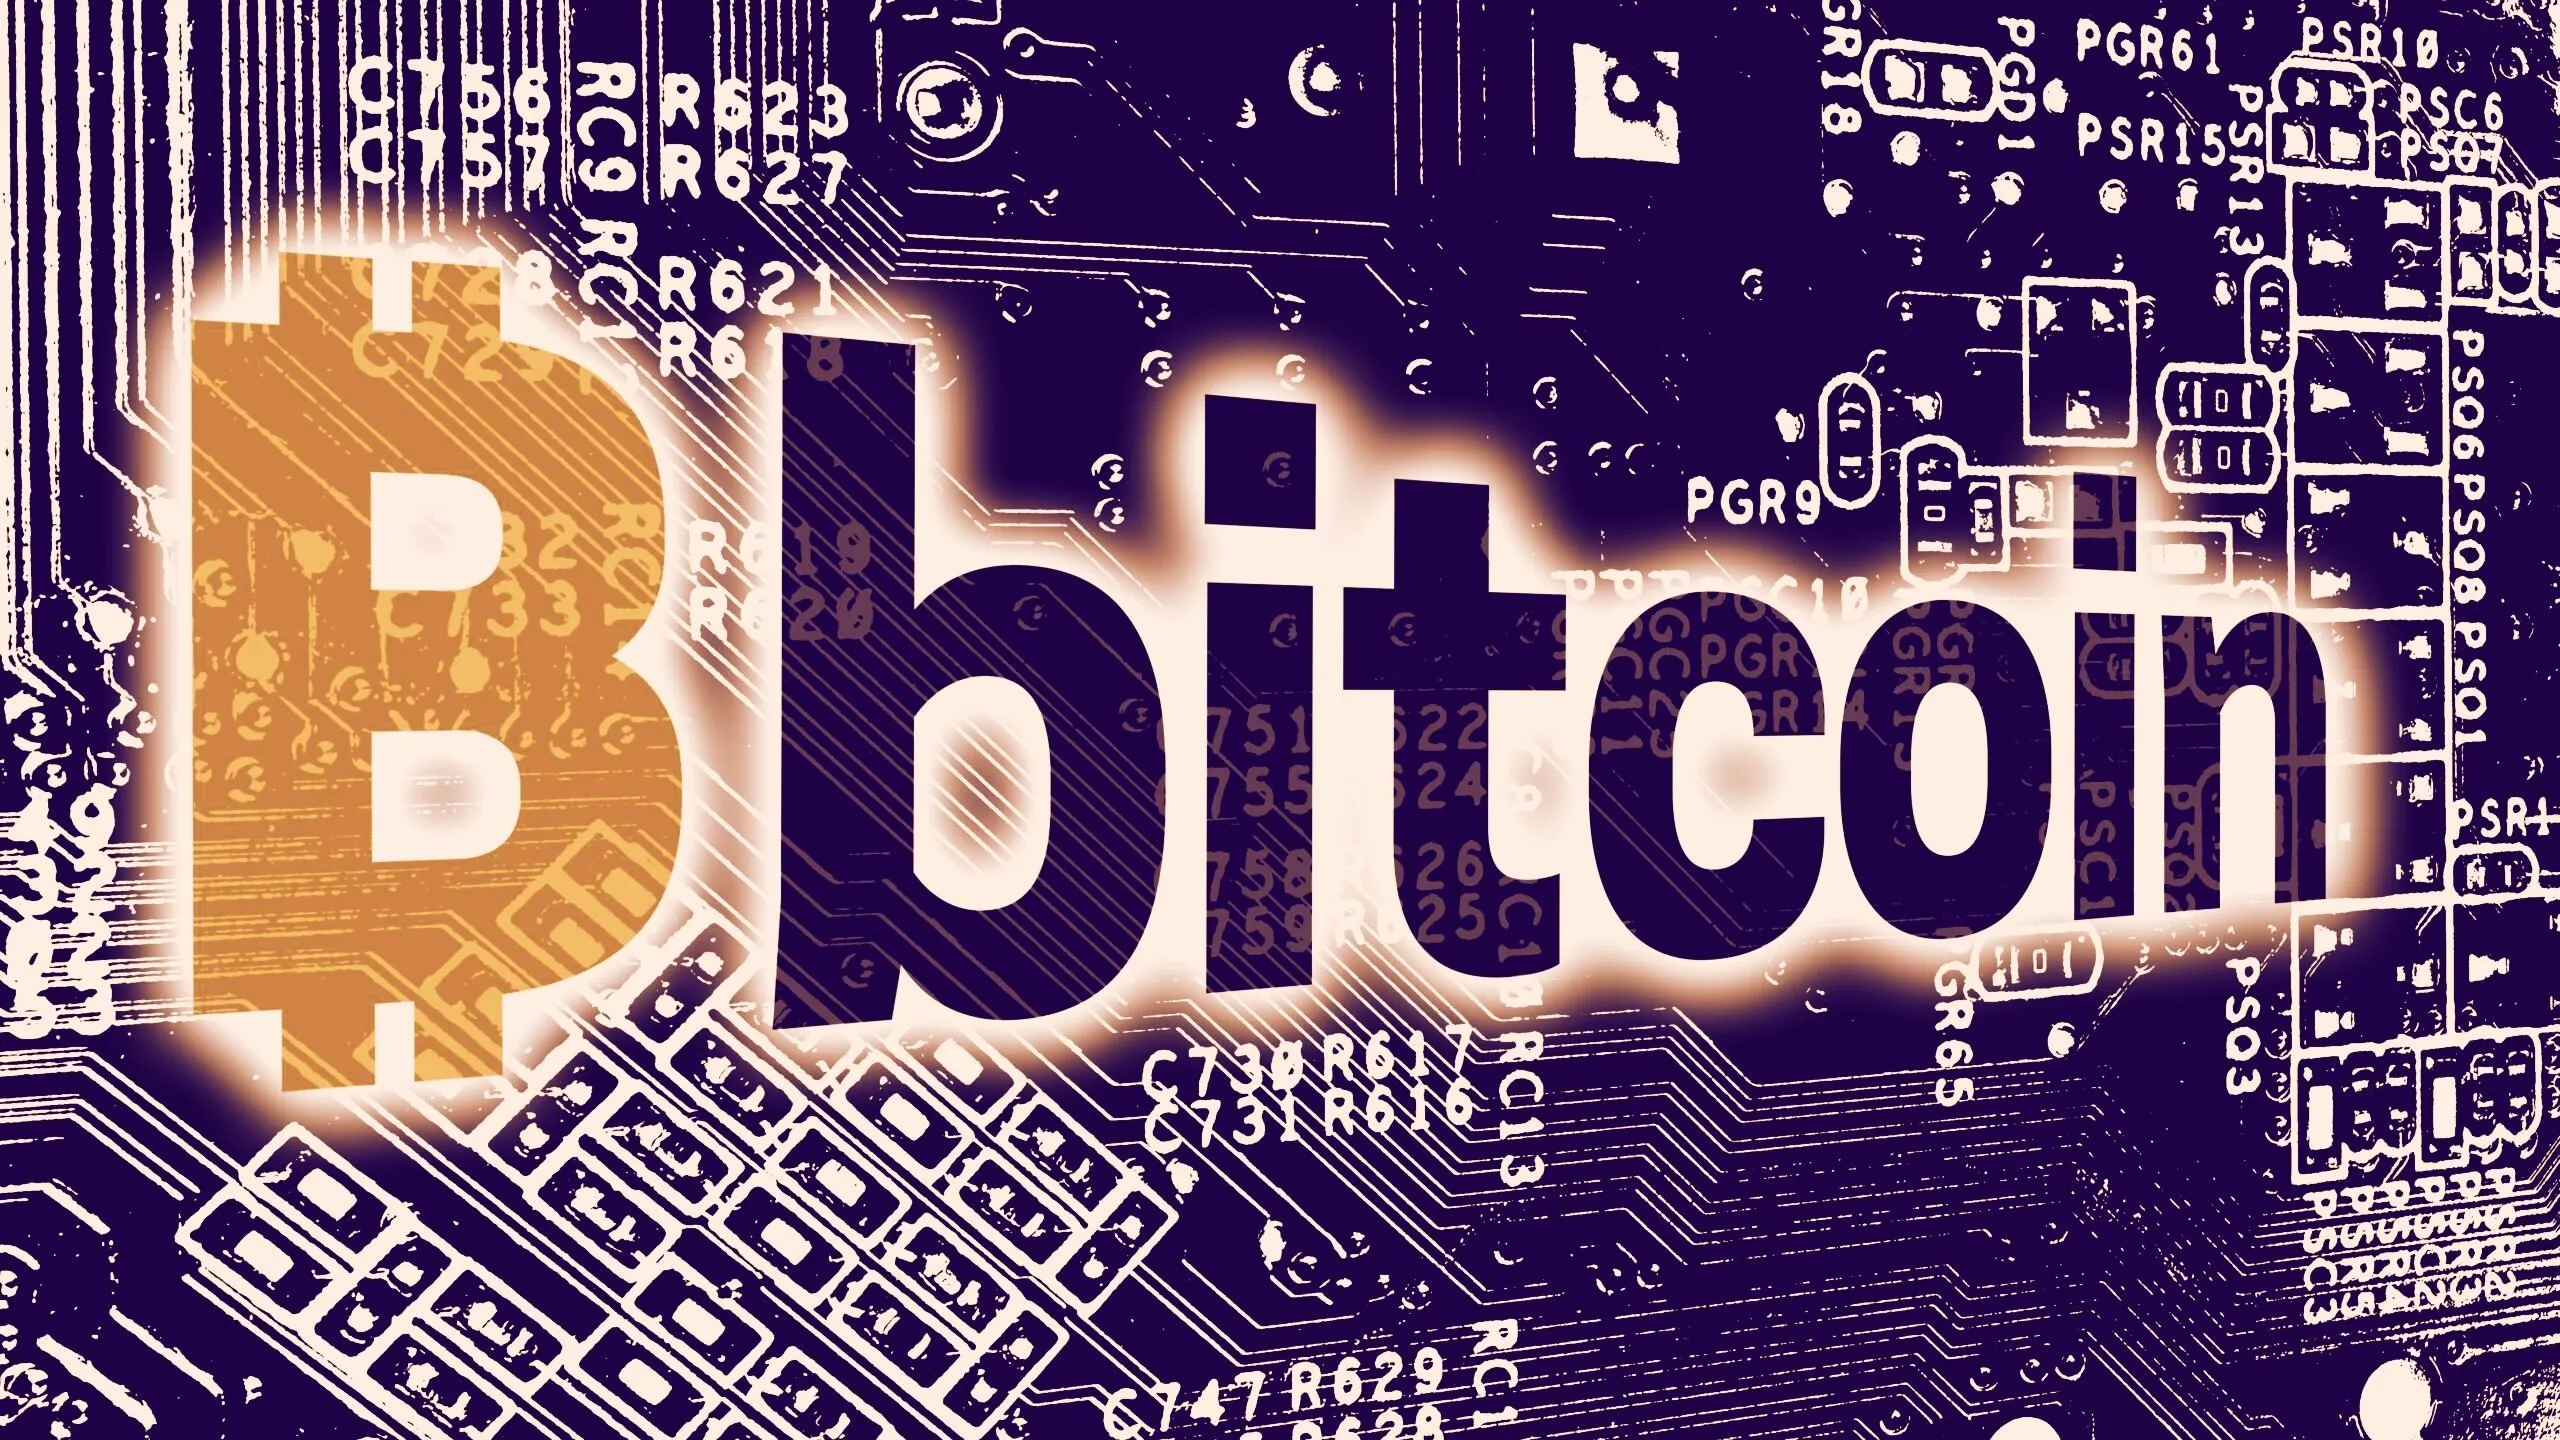 Bitcoin's open source software runs on hundreds of thousands of computers concurrently. Image: Shutterstock